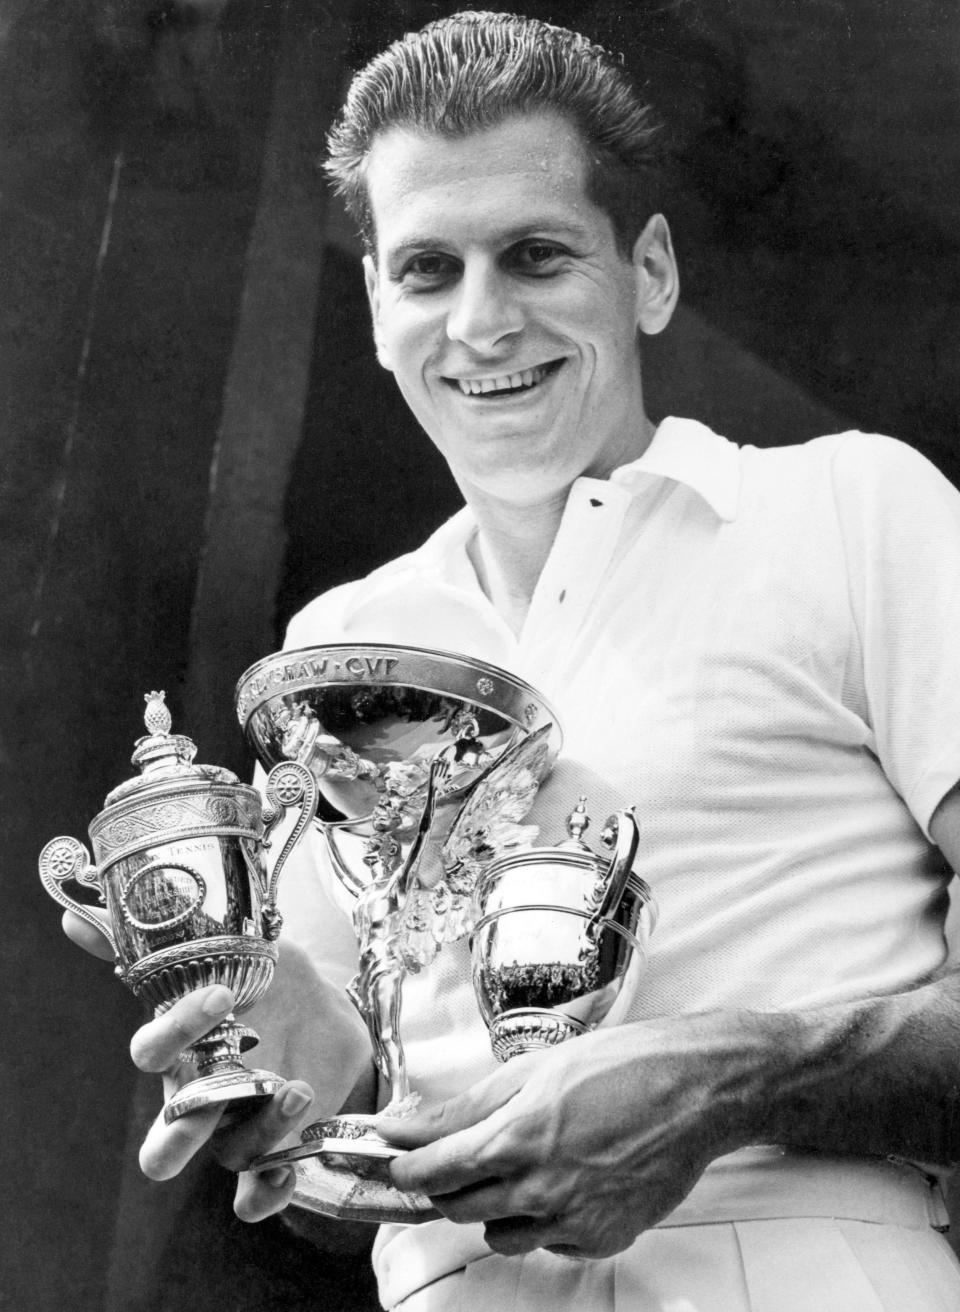 FILE - Dick Savitt of Orange, N.J., holds the three cups presented to him after winning the men's singles title at the All-England Lawn Tennis Championships in Wimbledon, England, on July 7, 1951. Savitt, who won the Australian Open and Wimbledon in 1951 shortly before walking away from a tennis career at age 25, passed away at home in New York on Friday, Jan. 6, 2023. He was 95. (AP Photo/Leslie Priest, File)